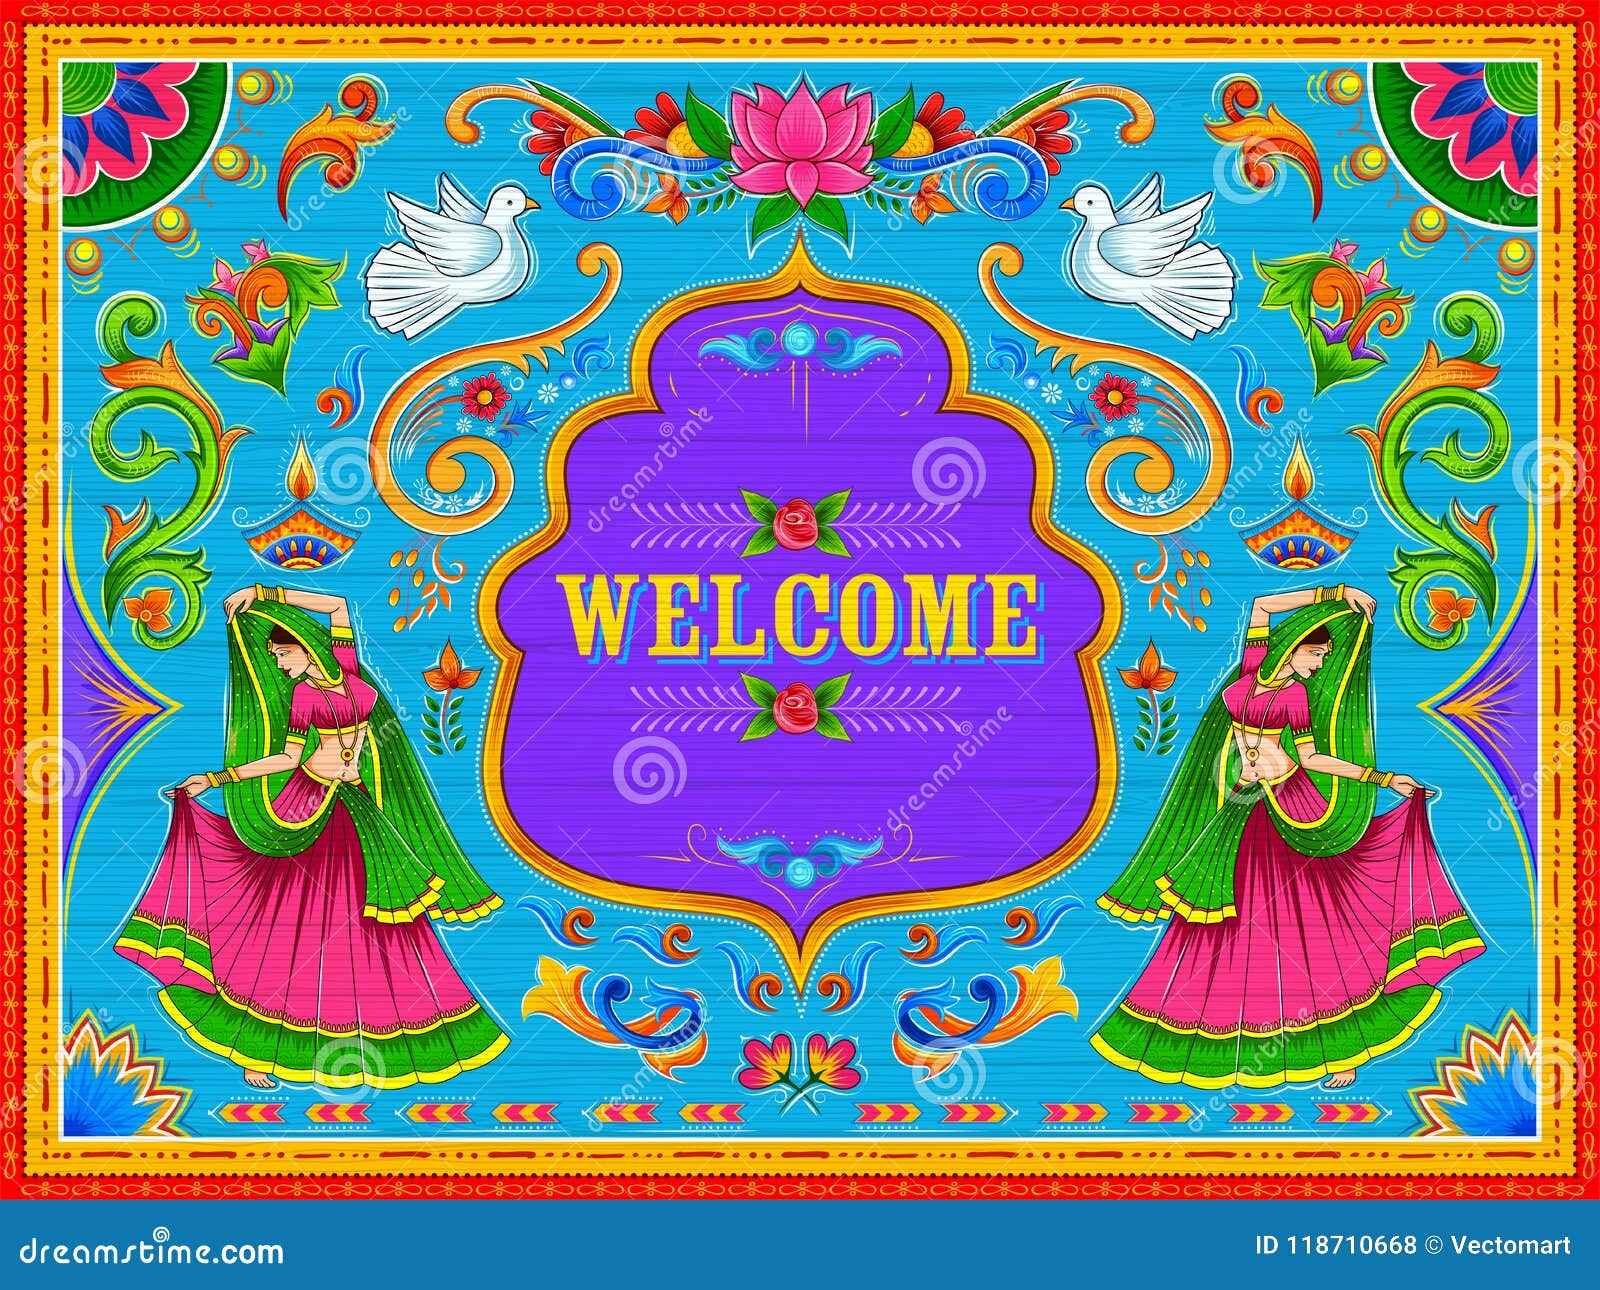 colorful welcome banner in truck art kitsch style of india